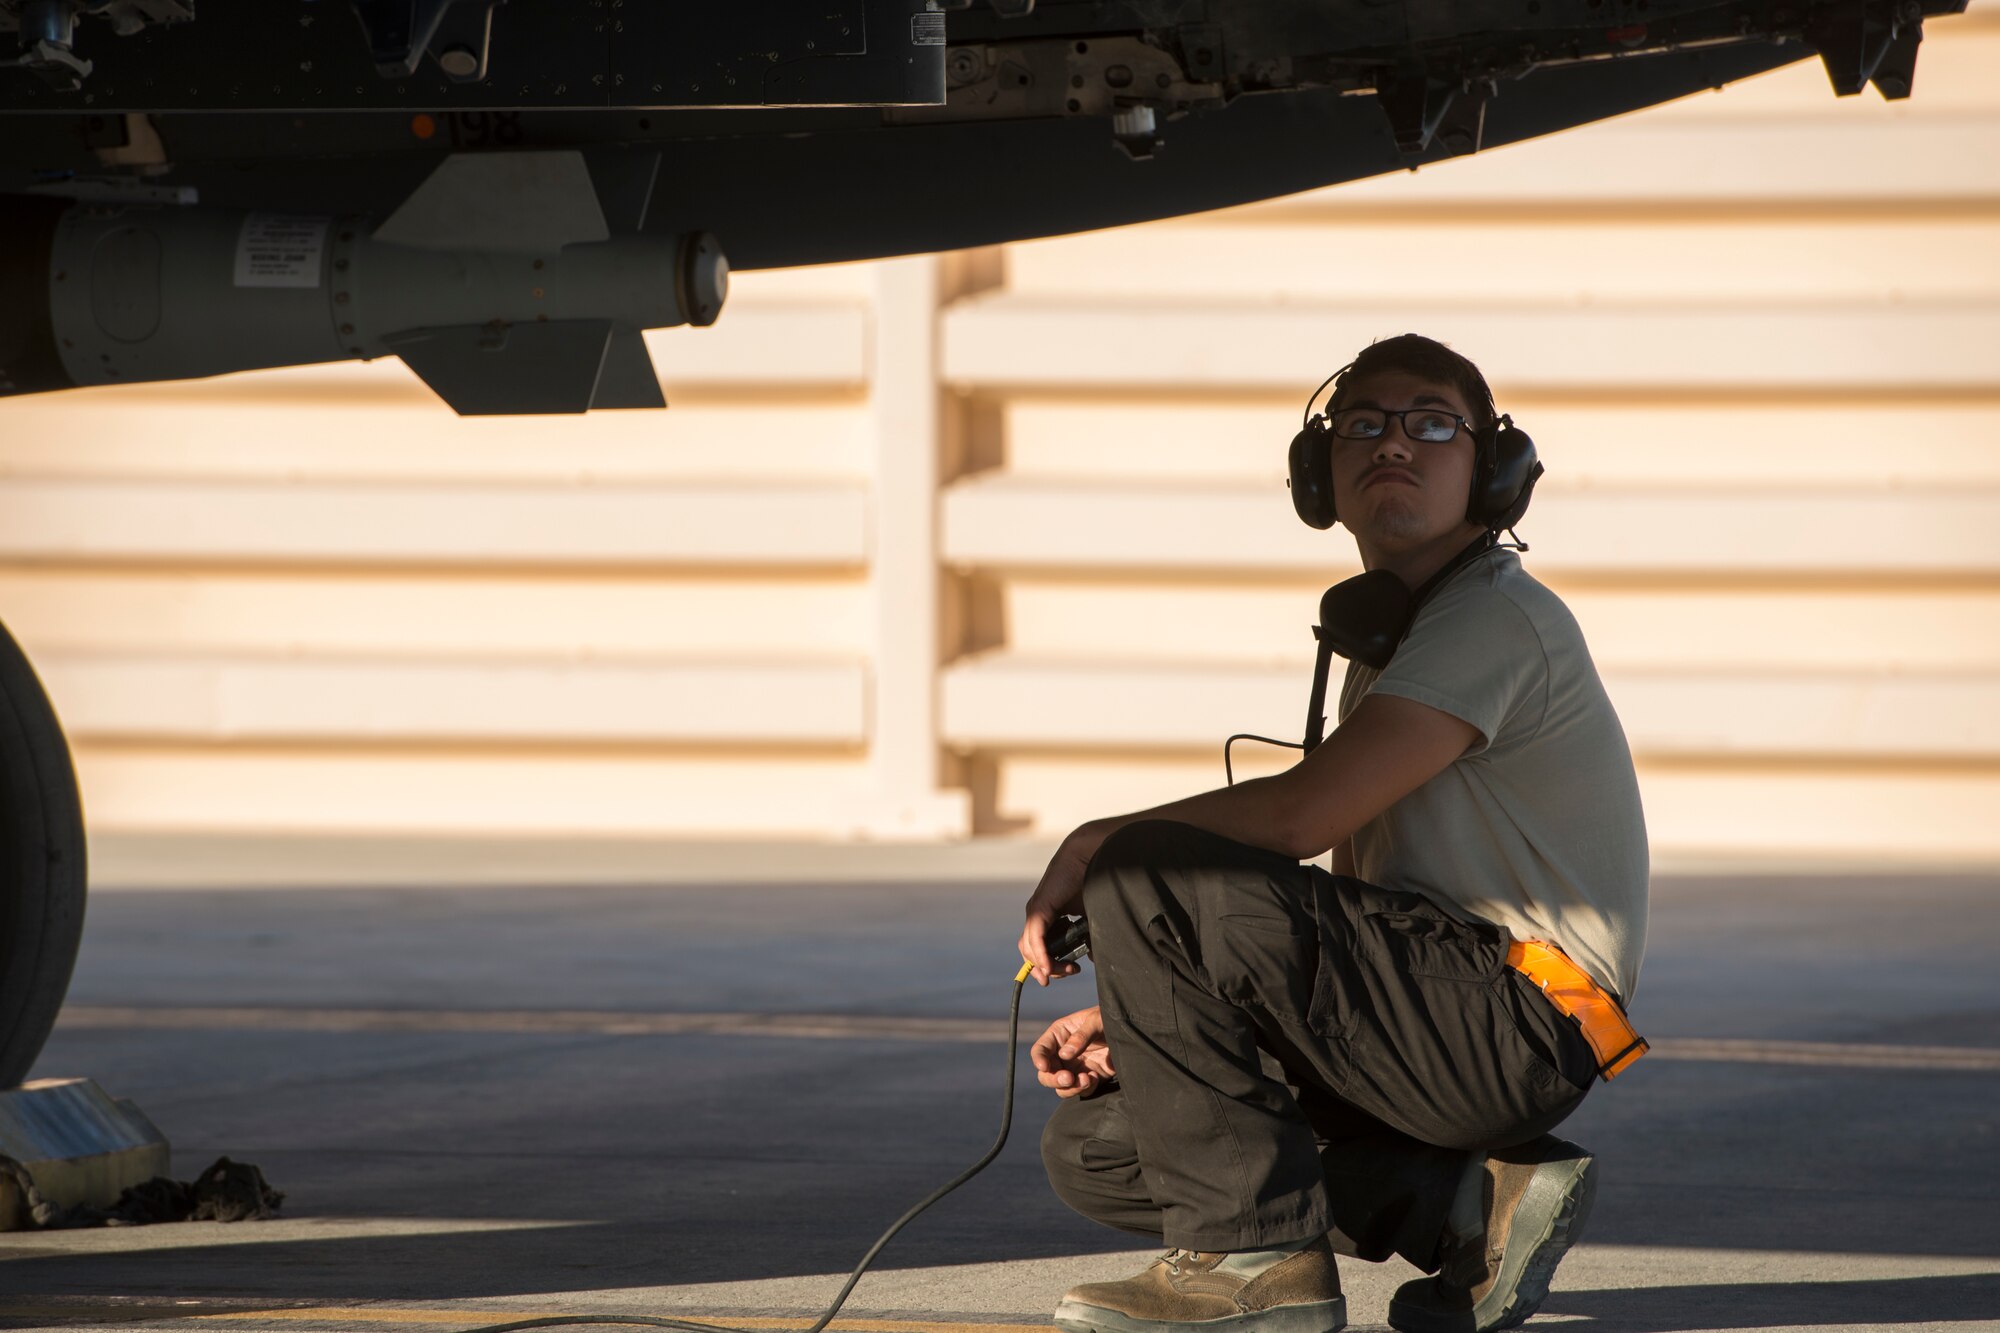 Airman 1st Class Connor Badton, 3911st Fighter Squadron assistant dedicated crew chief, inspects an F-15E Strike Eagle during Green Flag West, June 13, 2018, at Nellis Air Force Base, Nev. The 391st FS participated in the Green Flag exercise to further enhance readiness by training on Close Air Support over the National Training Center, Fort Irwin, Calif. (U.S. Air Force photo by Airman 1st Class JaNae Capuno)